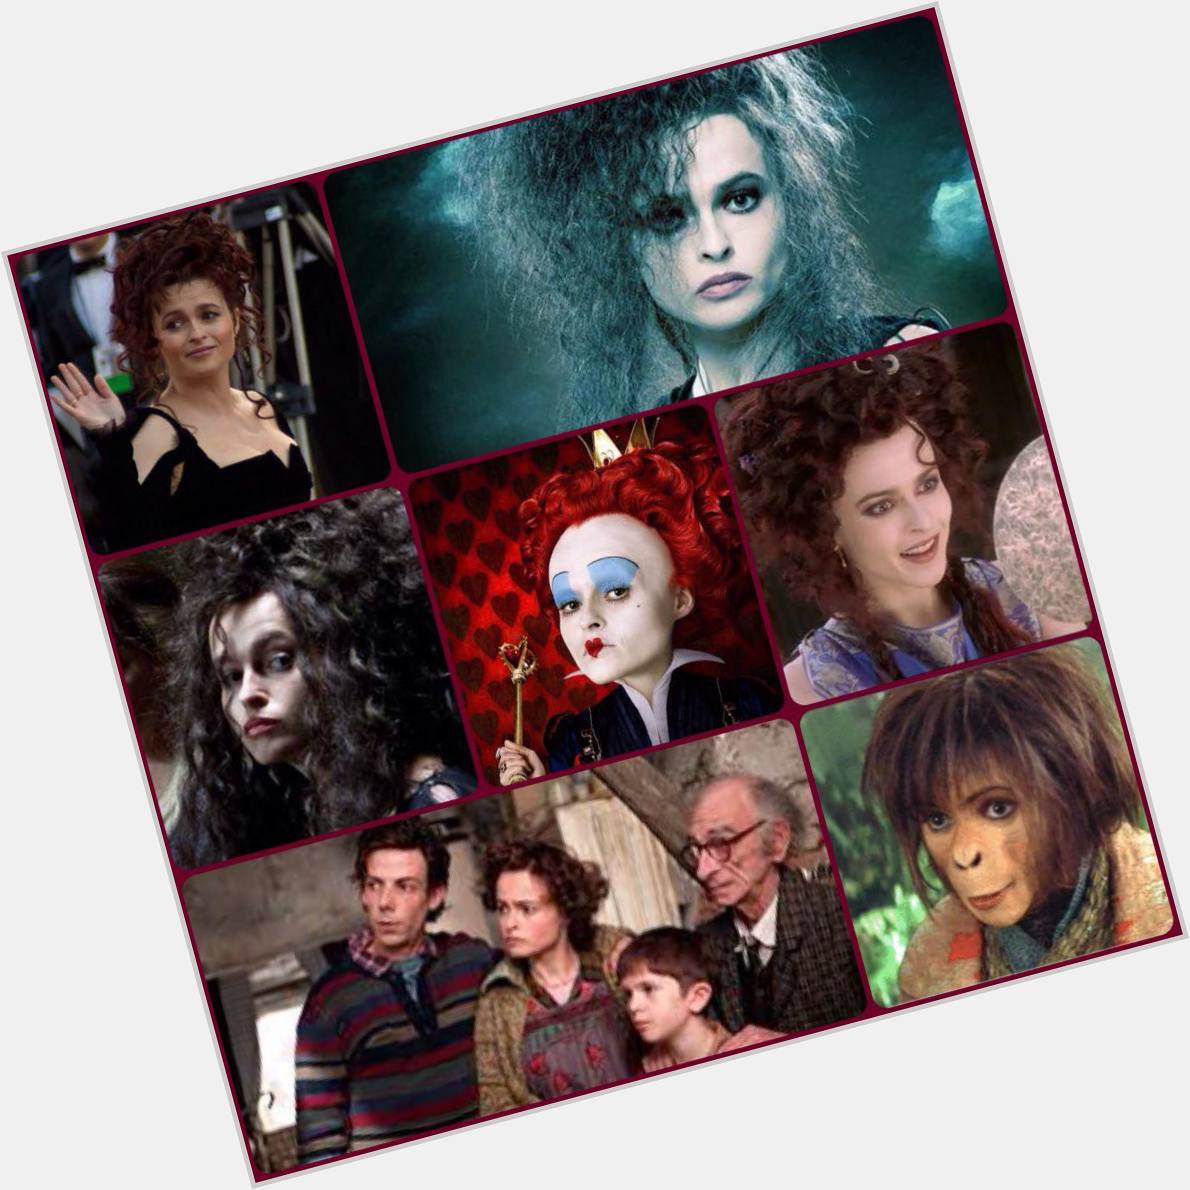 Happy 57th to Helena Bonham Carter! Which of her movie roles is your favorite?  